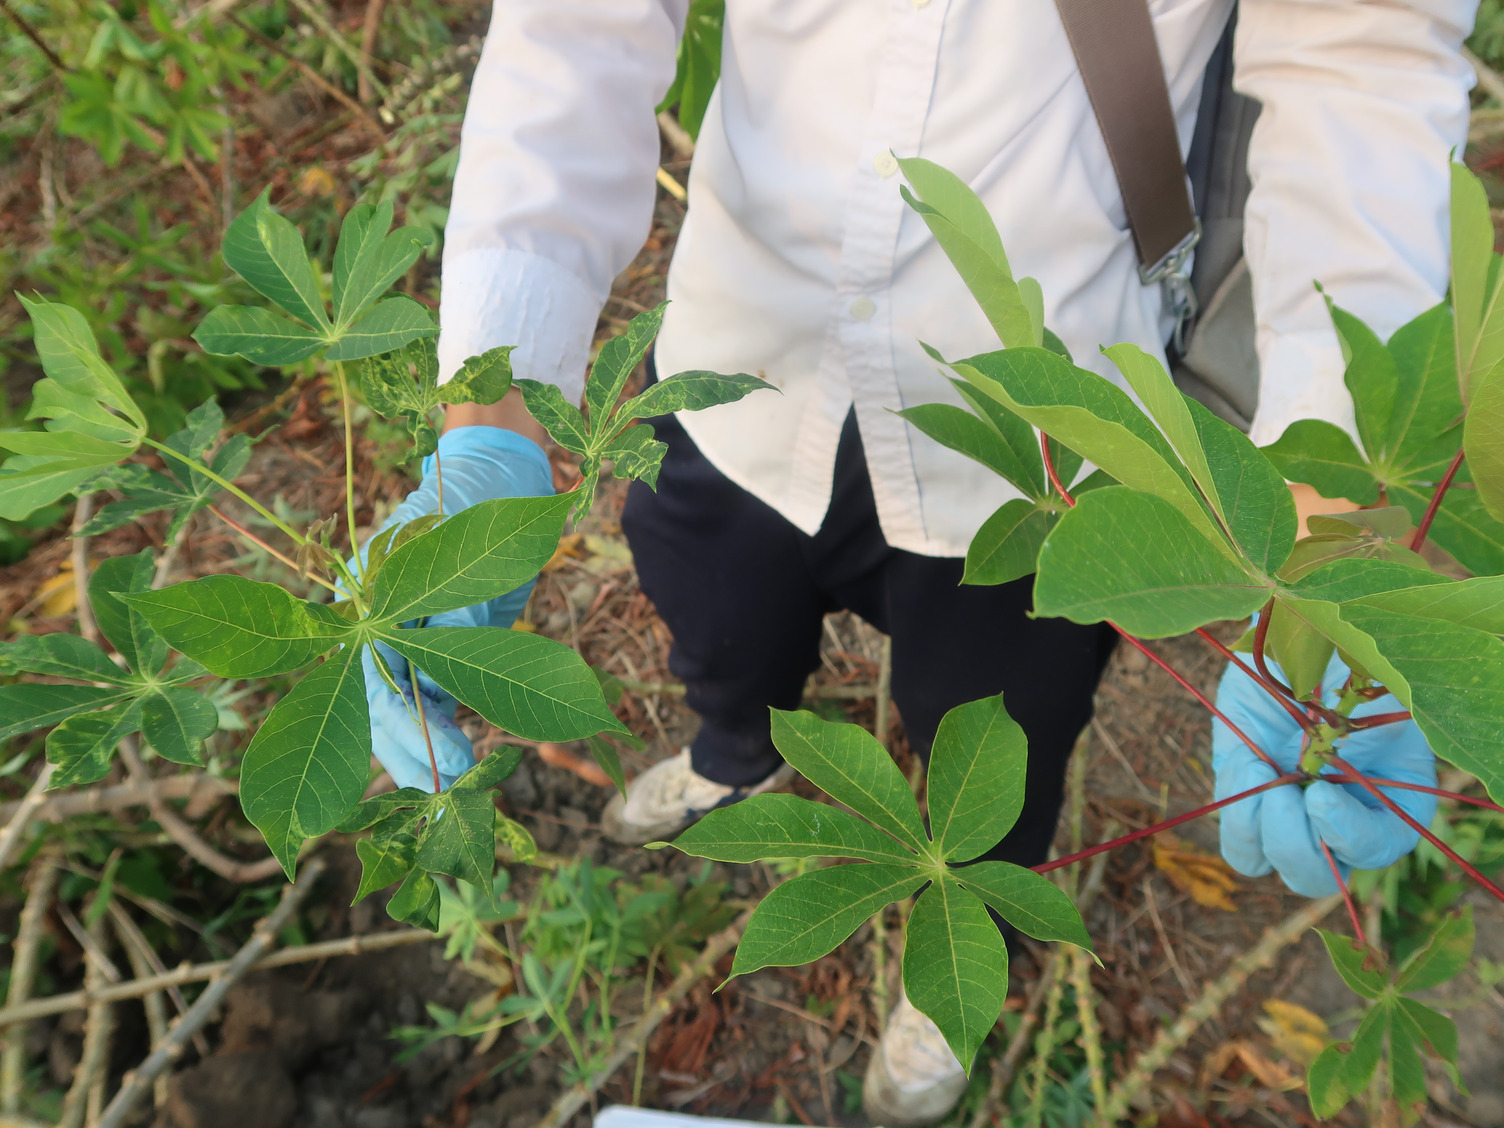 A CMD-infected cassava (left) and a CMD-resistant cassava introduced by CIAT (right) in the second trial in Tay Ninh province, Vietnam.